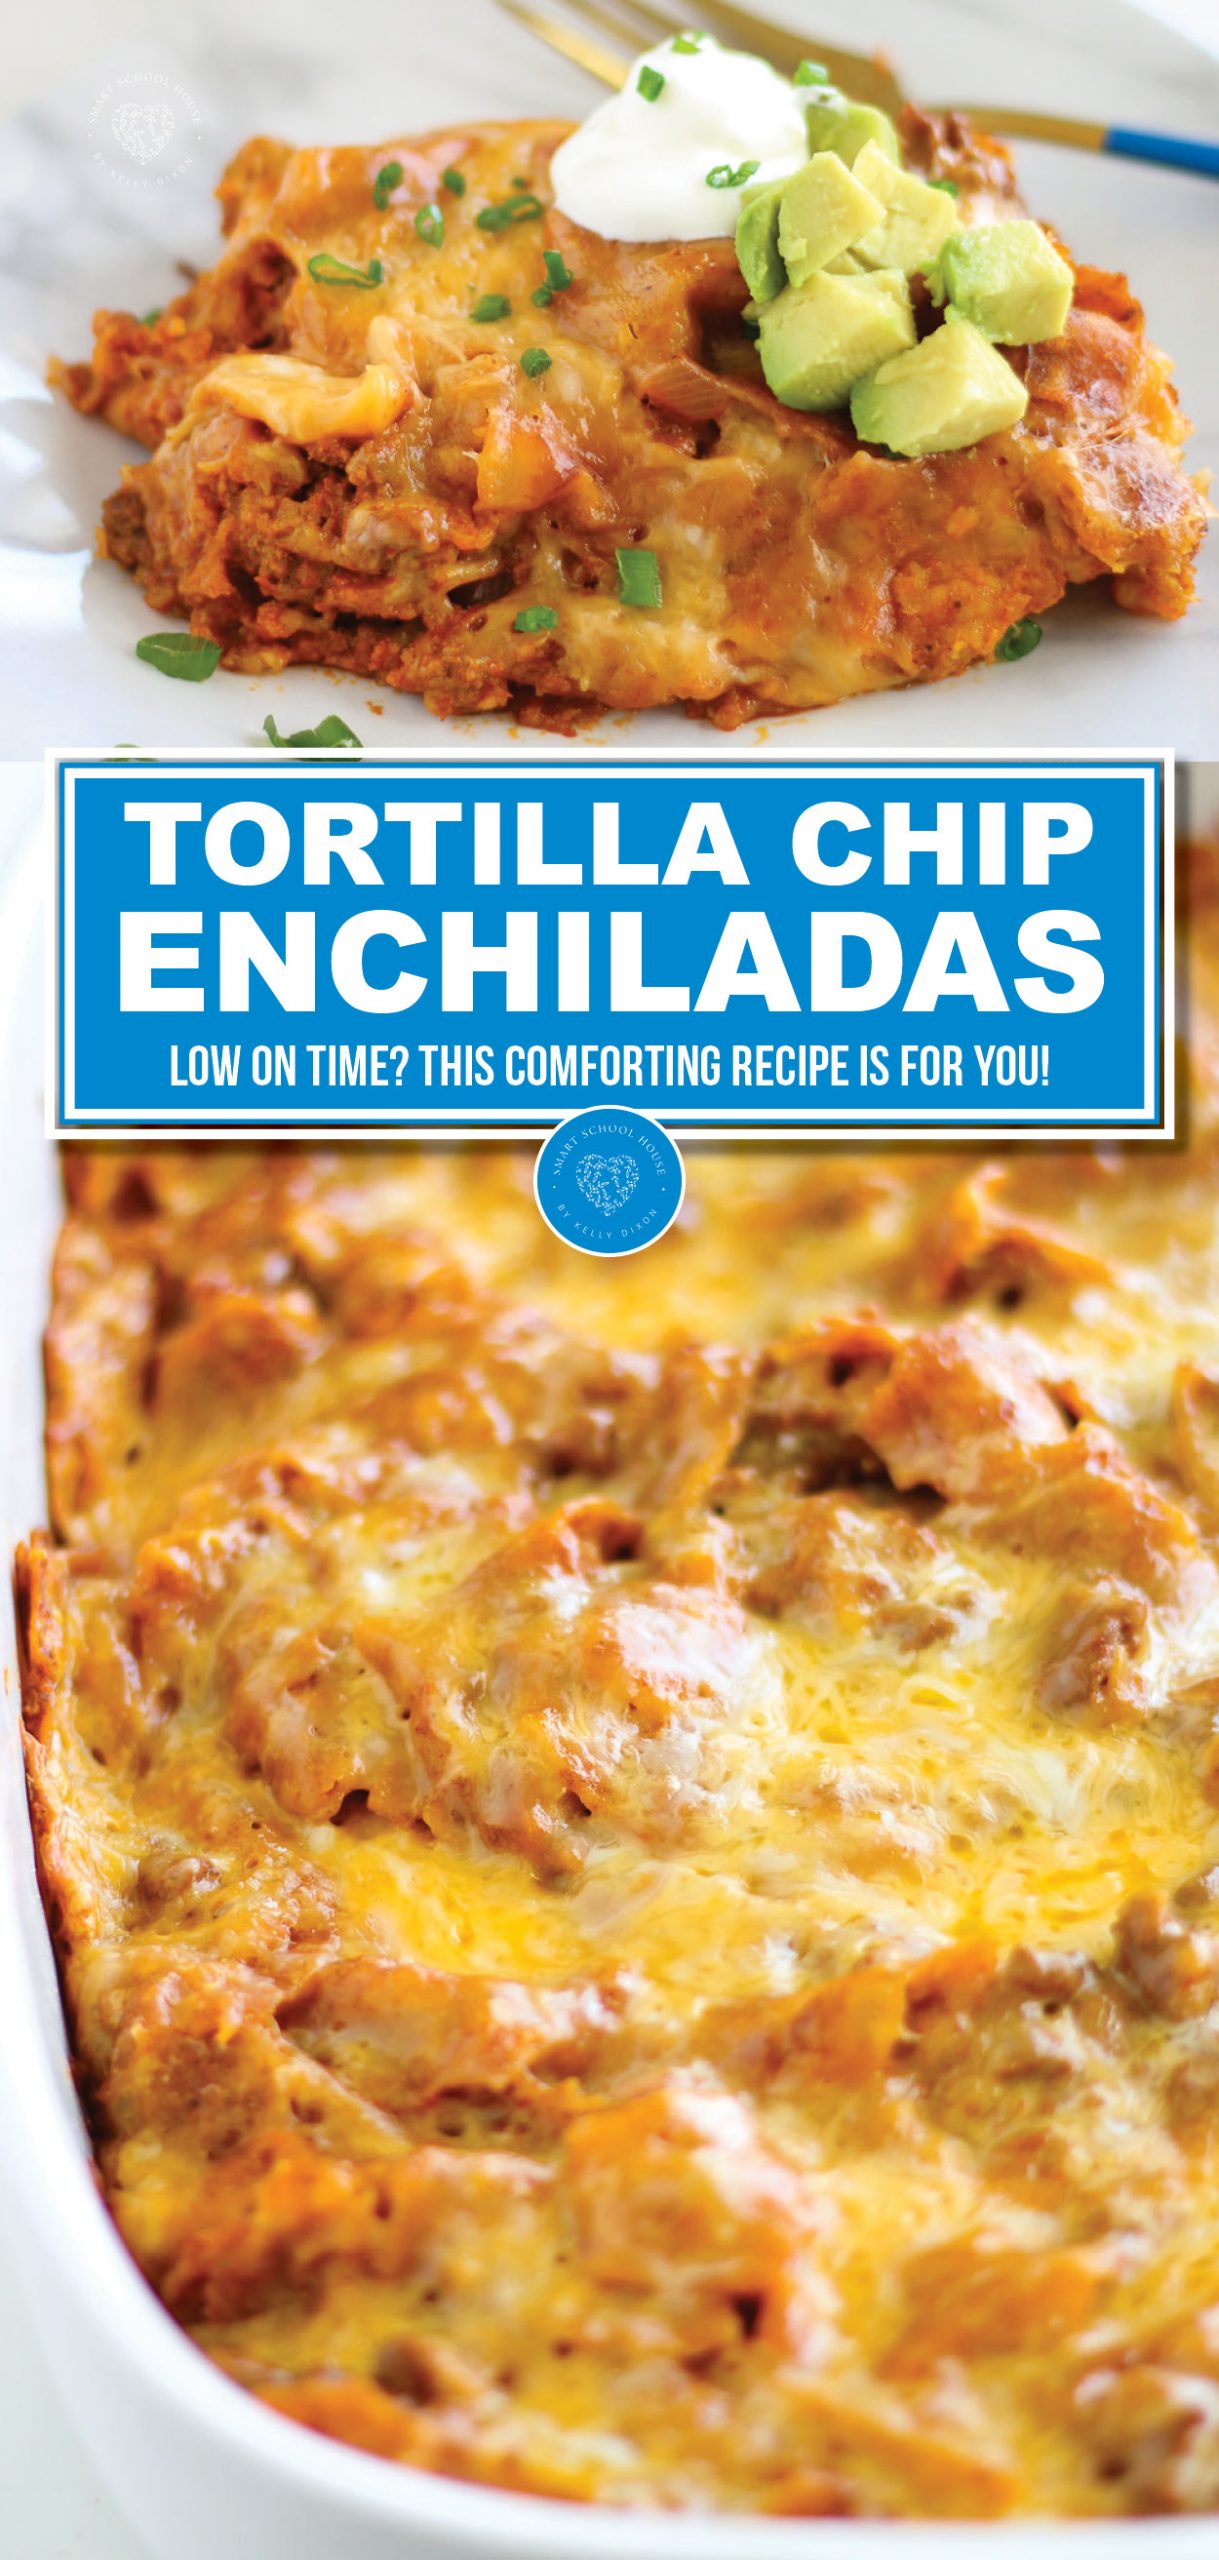 Tortilla Chip Enchiladas are made with beef or chicken, enchilada sauce, spices, cheese, and crispy tortilla chips.